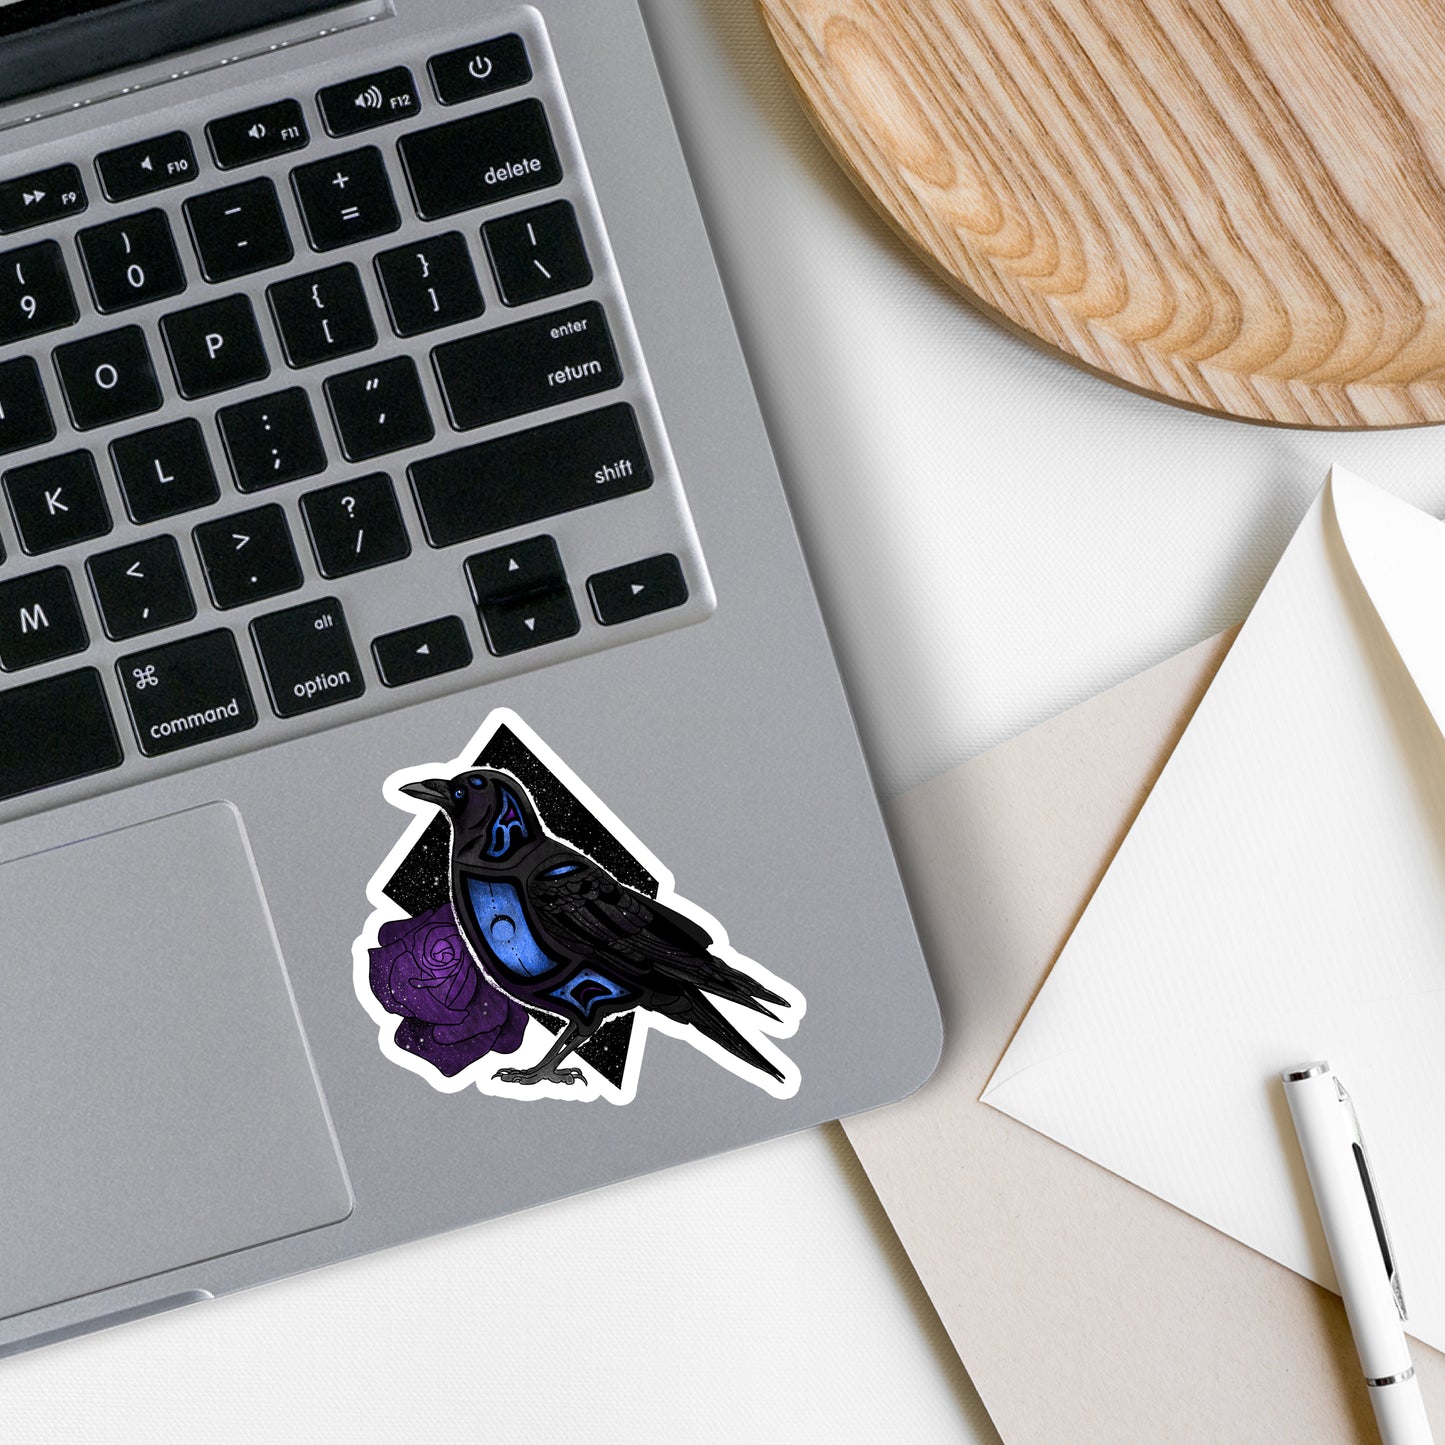 Blue and Purple Raven and Rose Vinyl Sticker